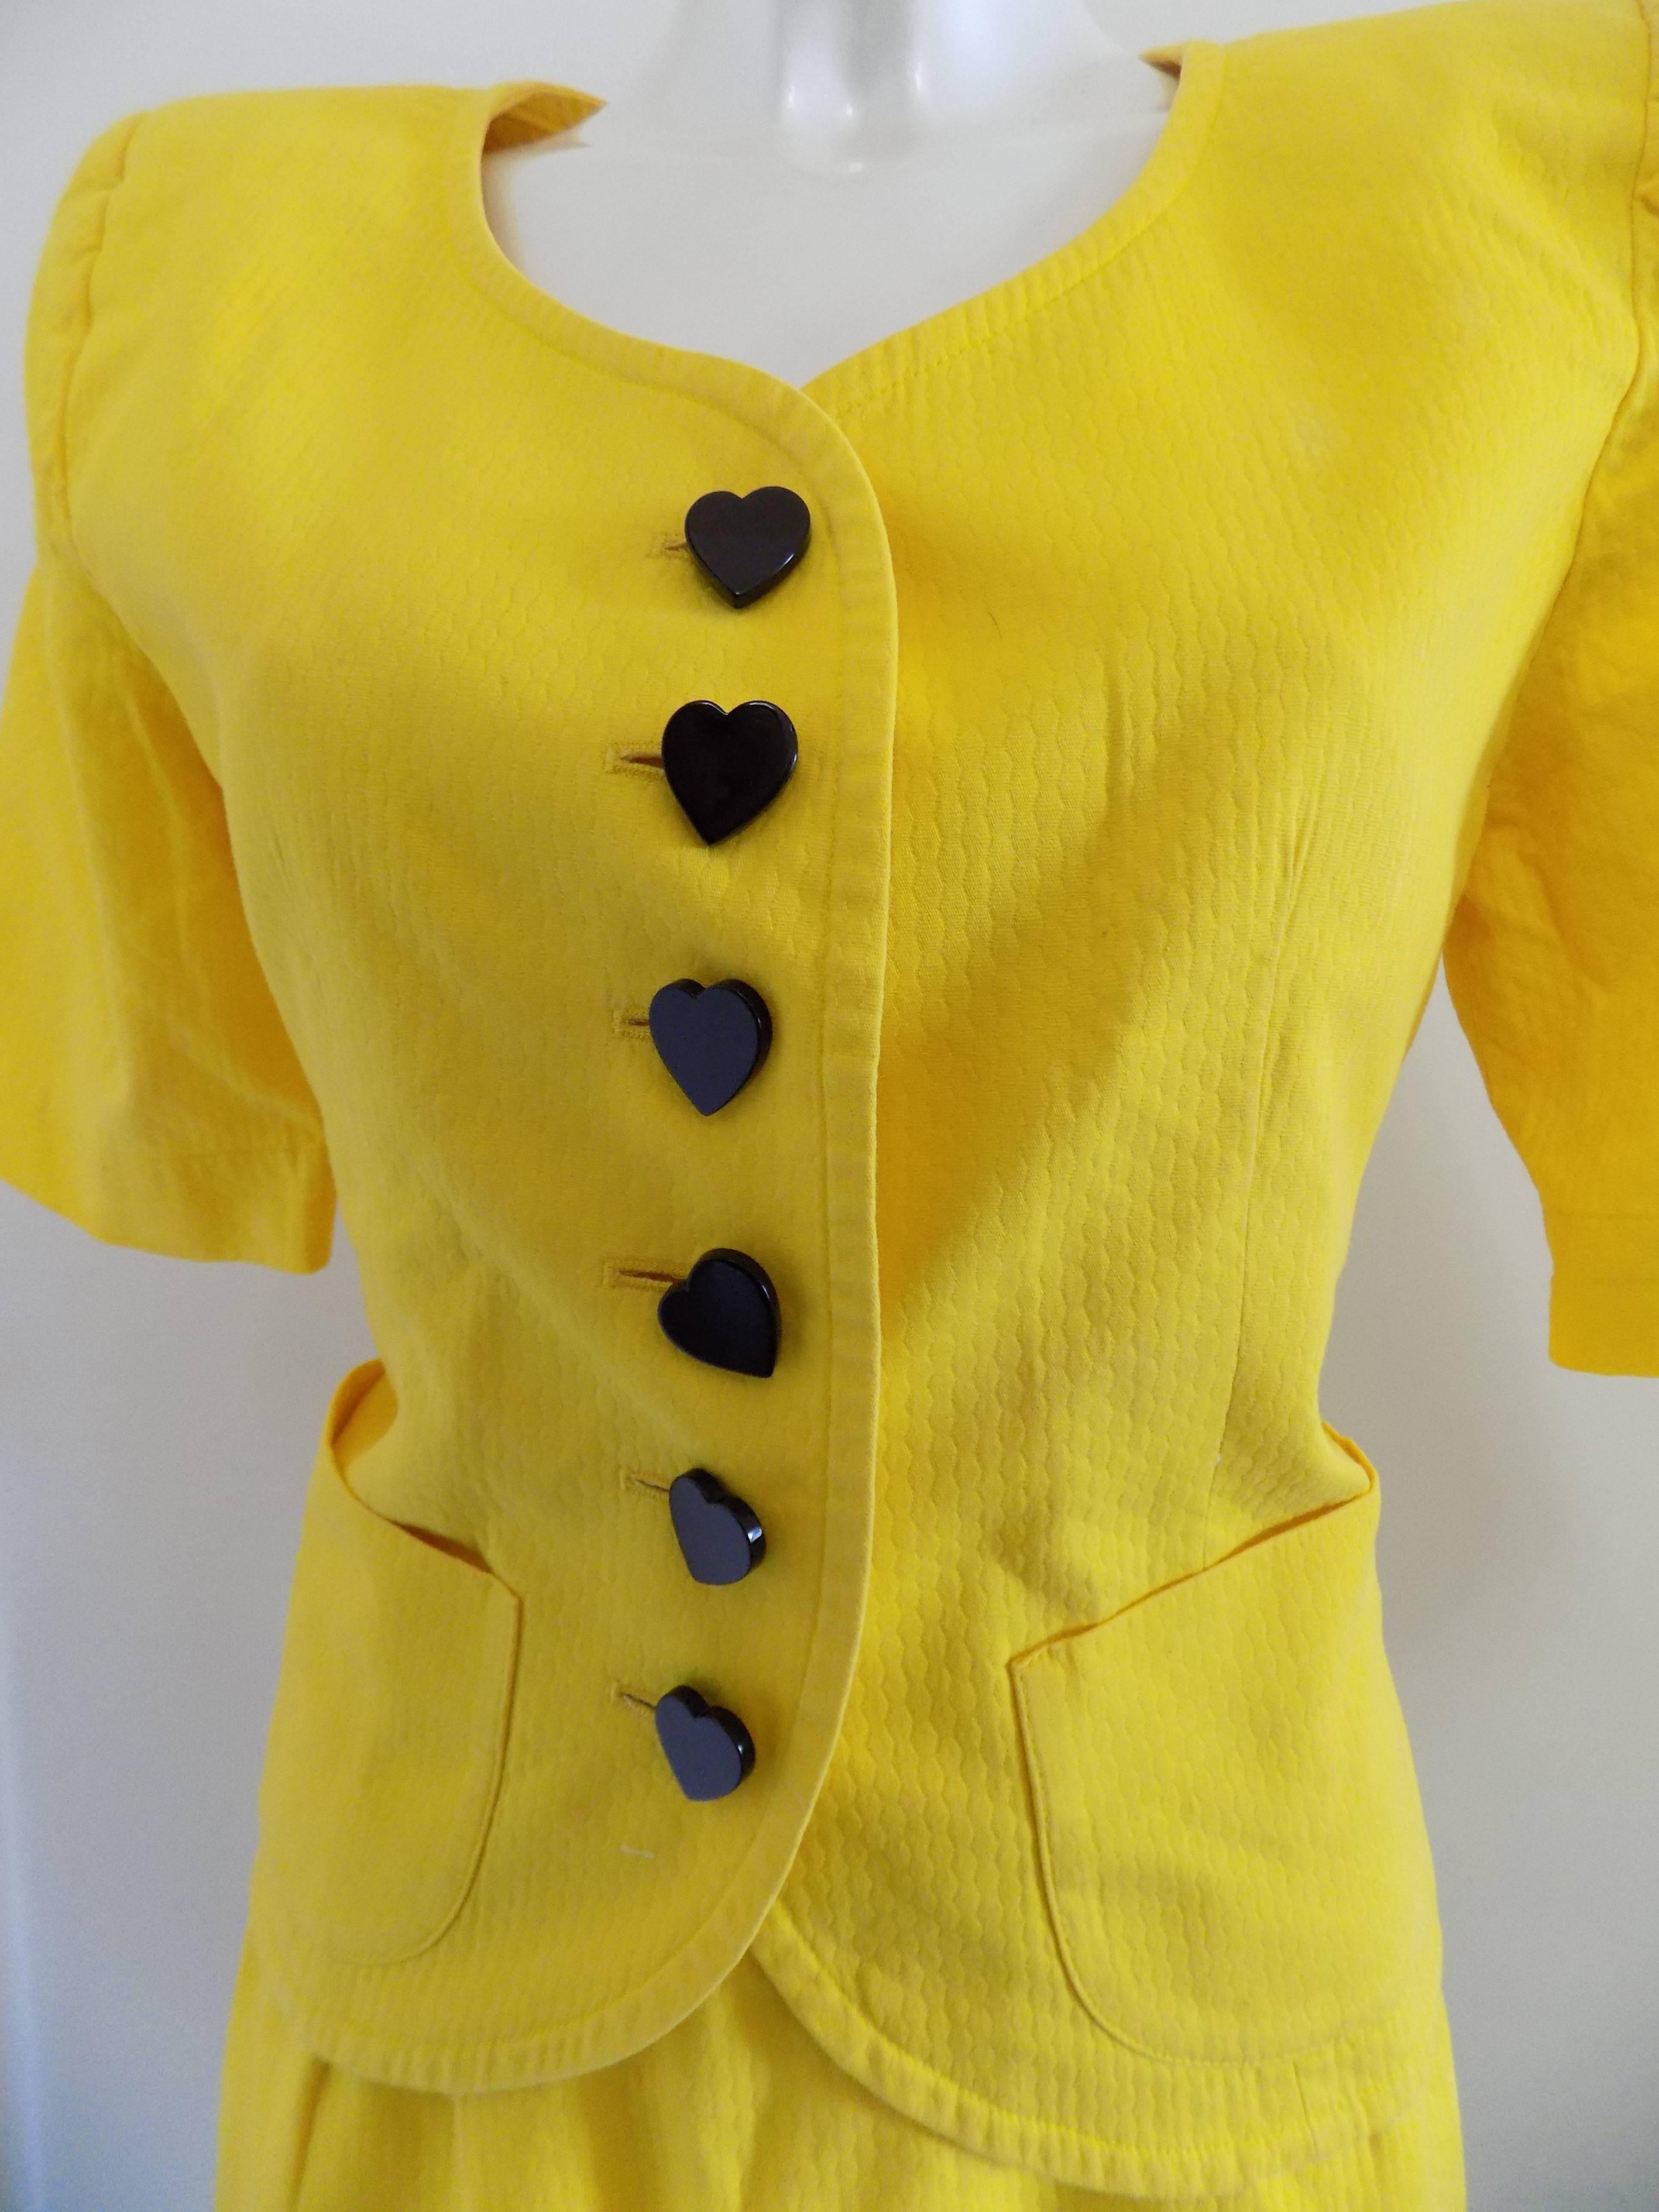 1970s Yves Saint Laurent Yellow Suit. Skirt and jacket with black buttons hearts

Totally made in france in european size range 42 